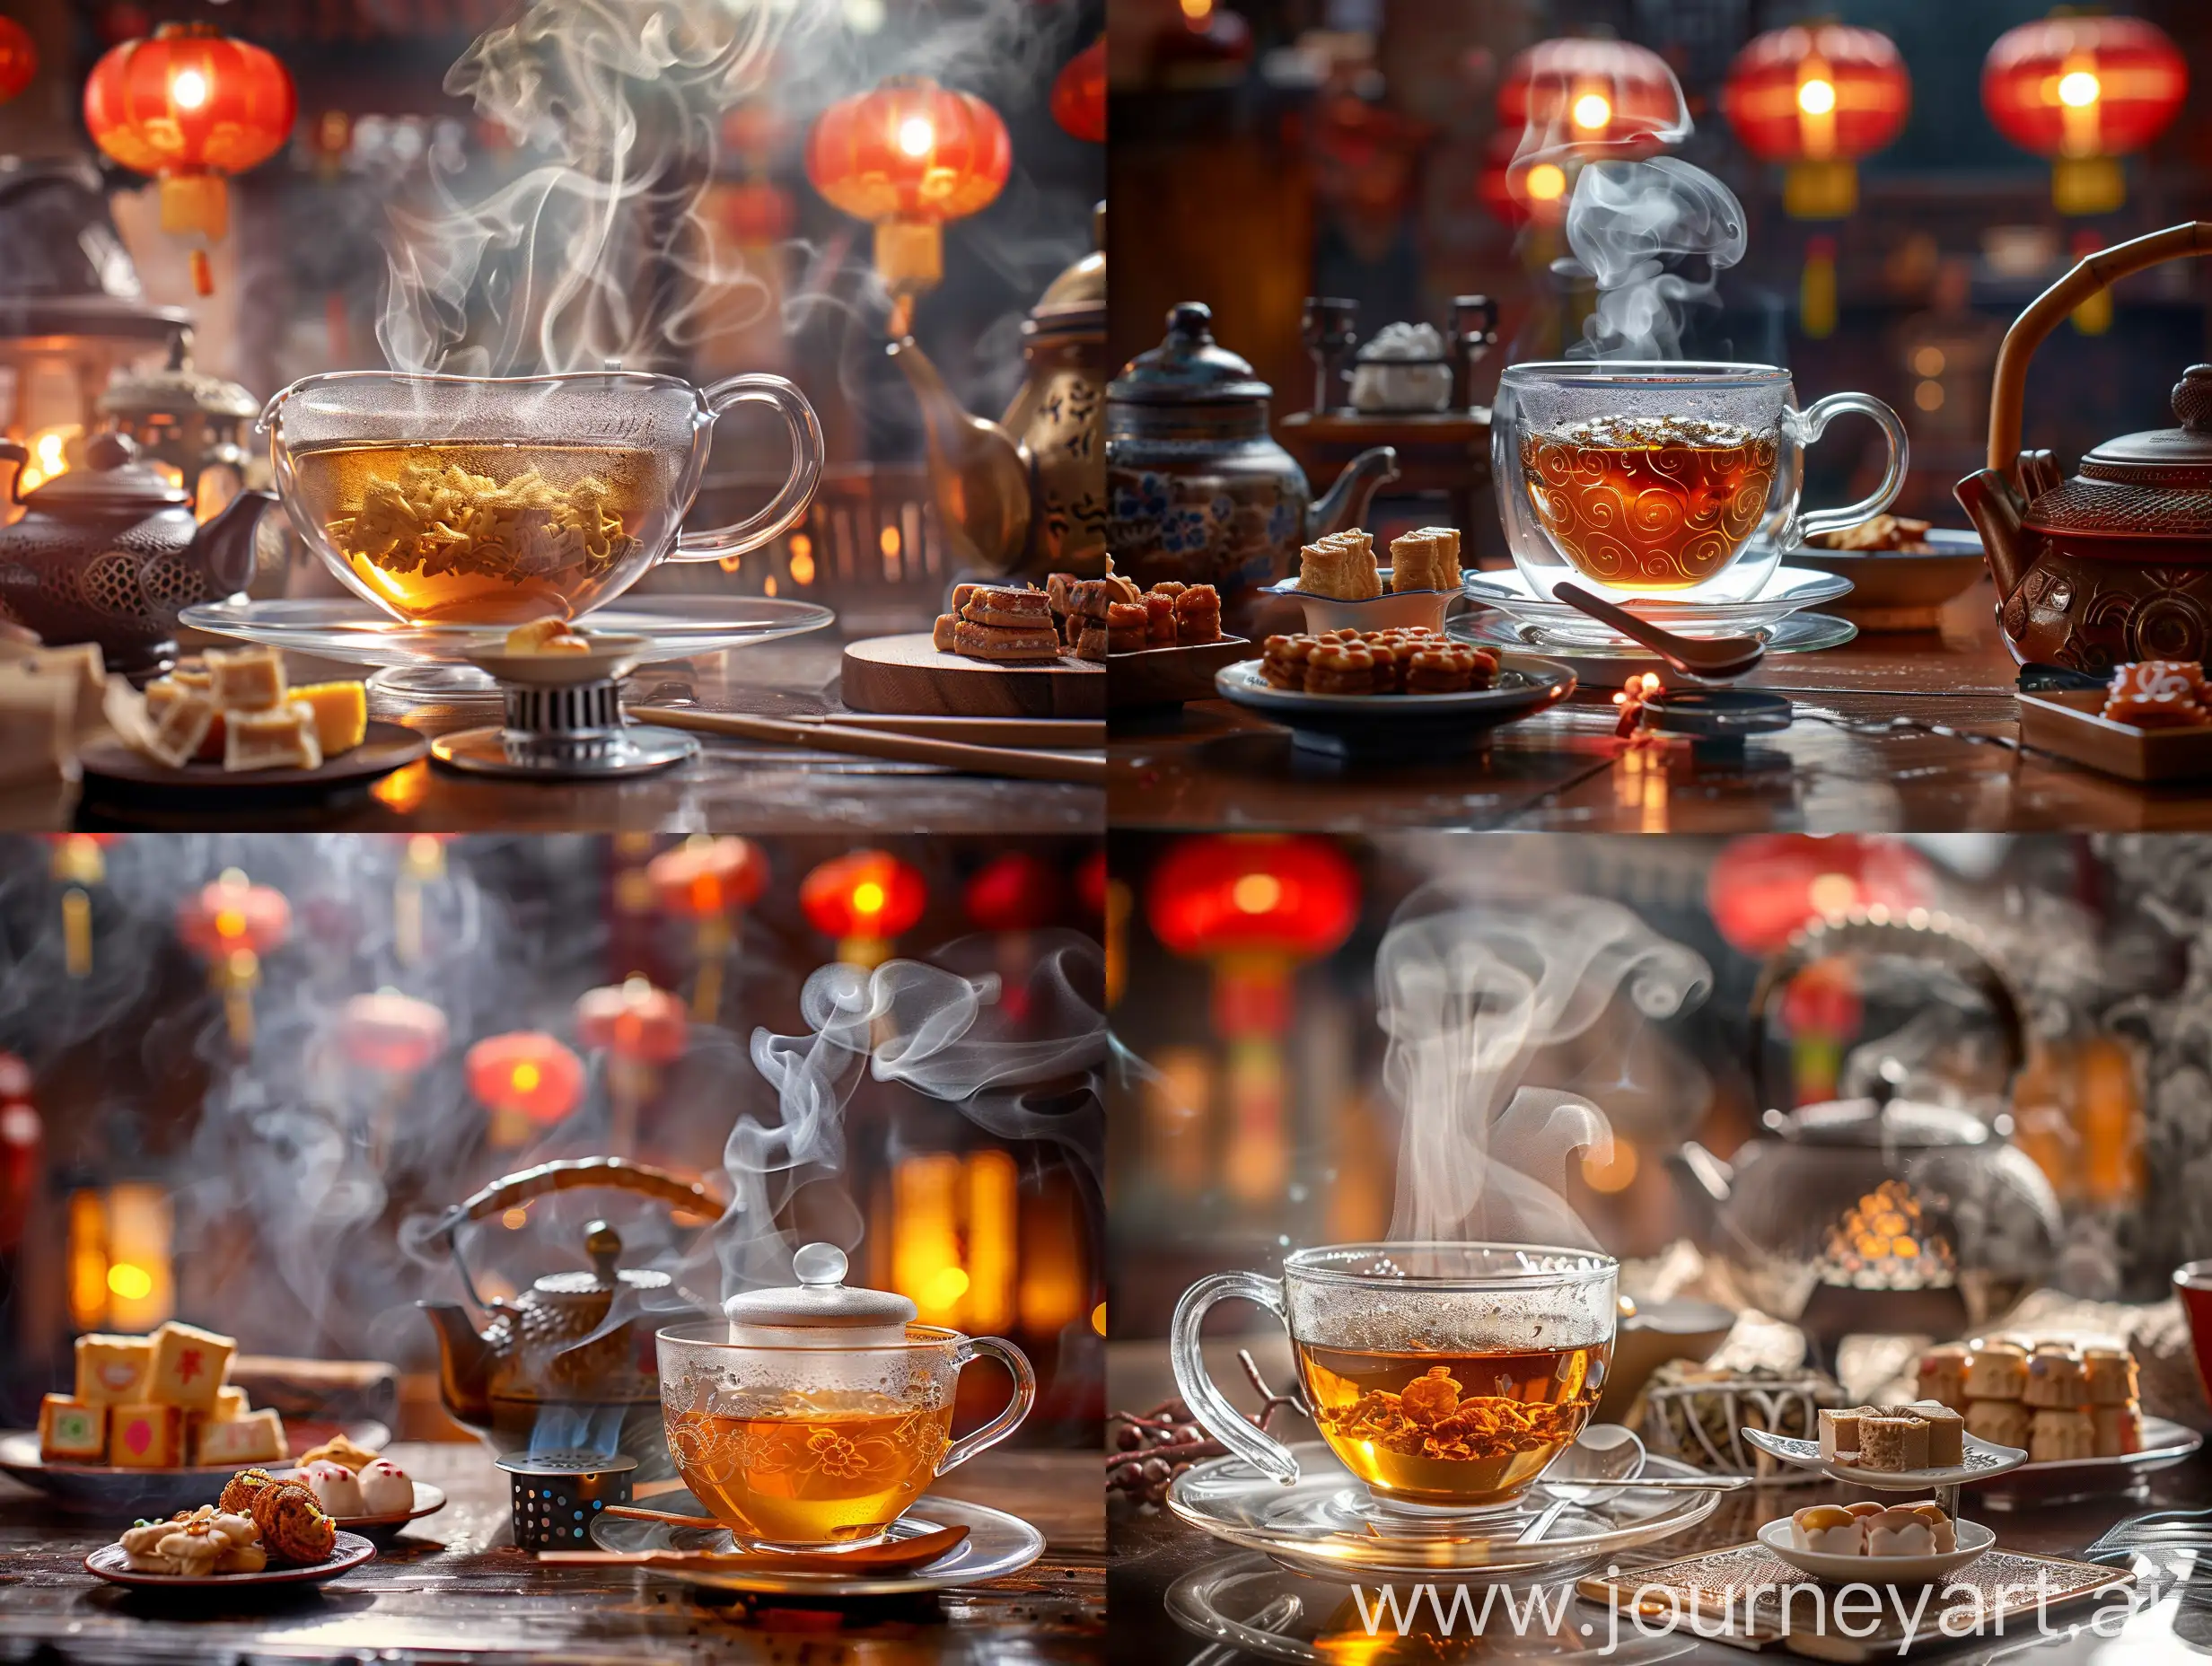 Chinese-Tea-Ceremony-with-Transparent-Teacup-and-Sweets